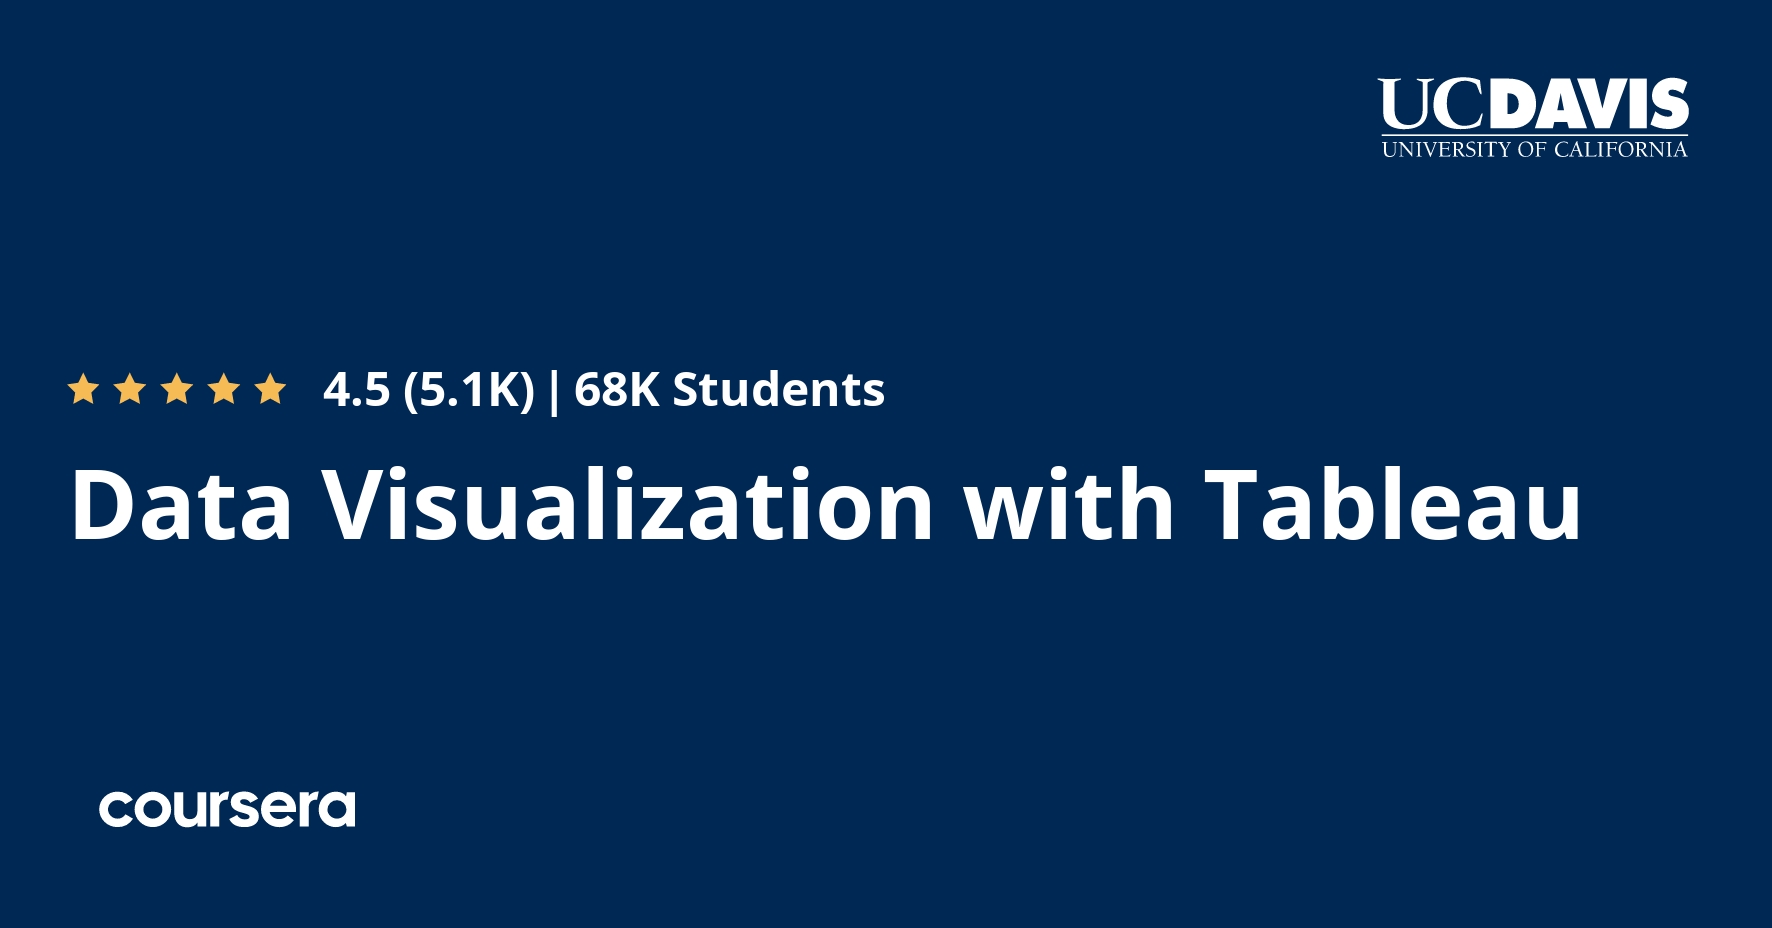 Data Visualization with Tableau Specialization